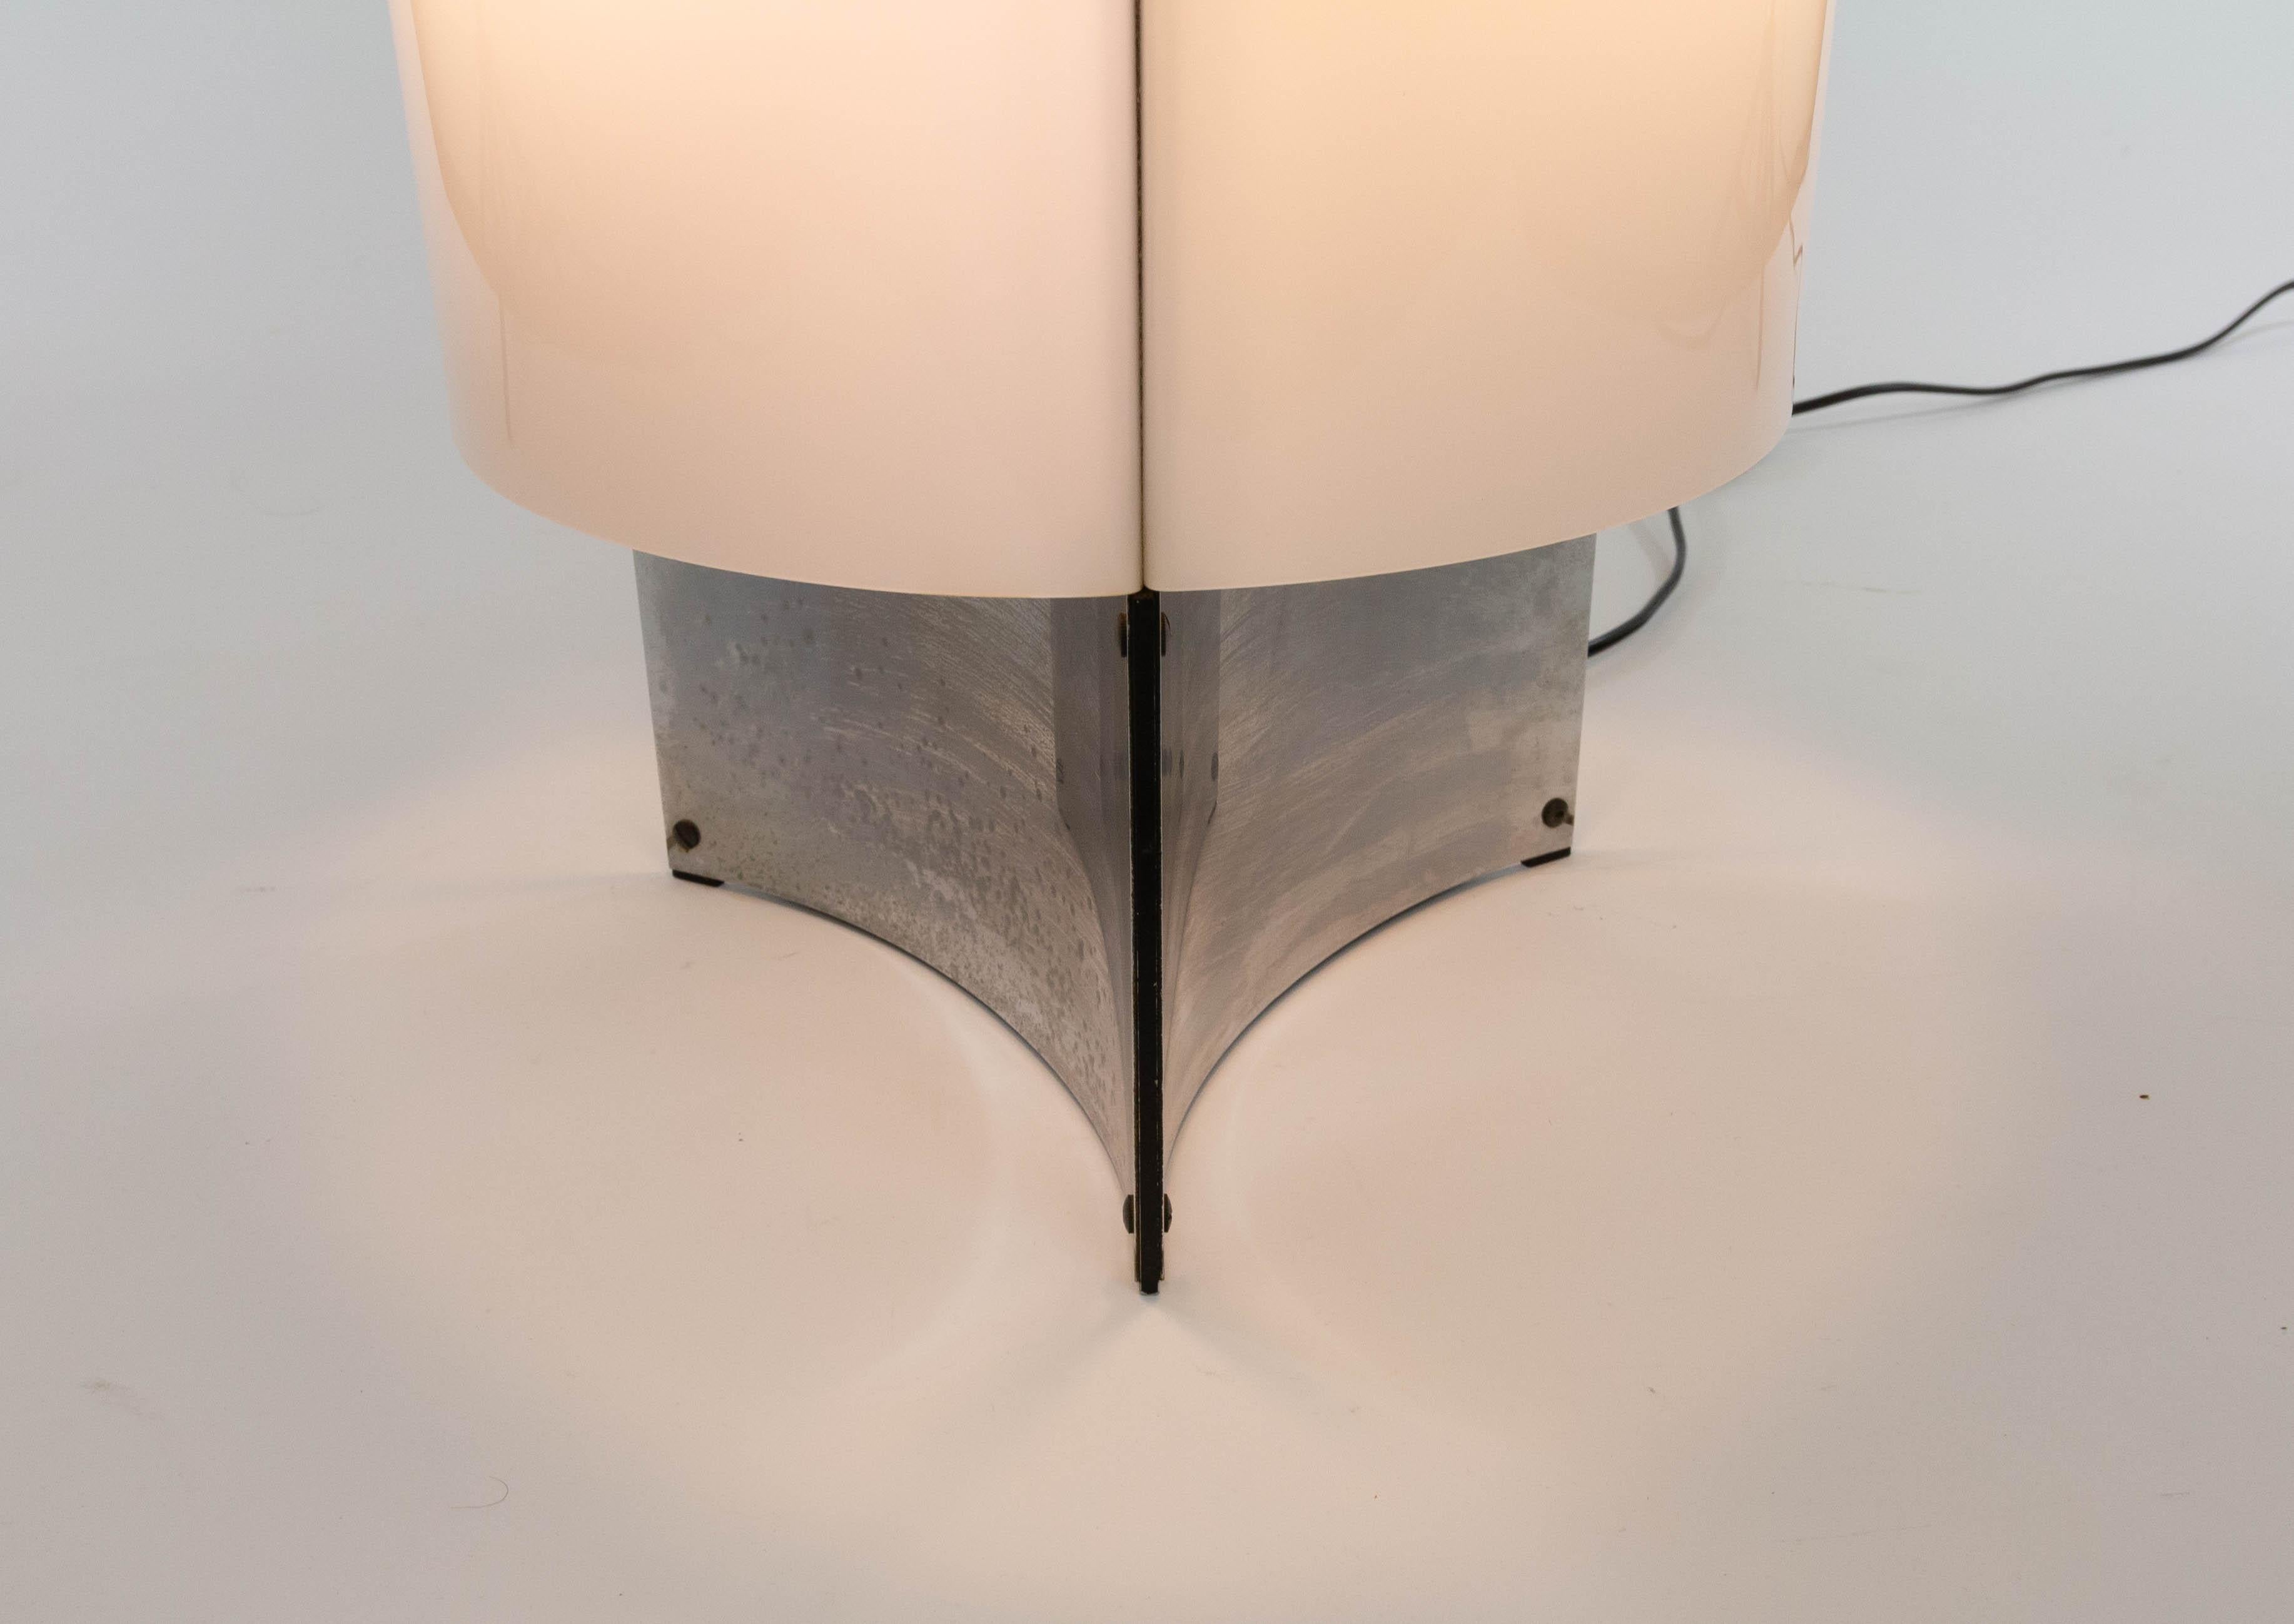 Polychromed Table Lamp Model No. 526 by Massimo Vignelli for Arteluce, 1965 For Sale